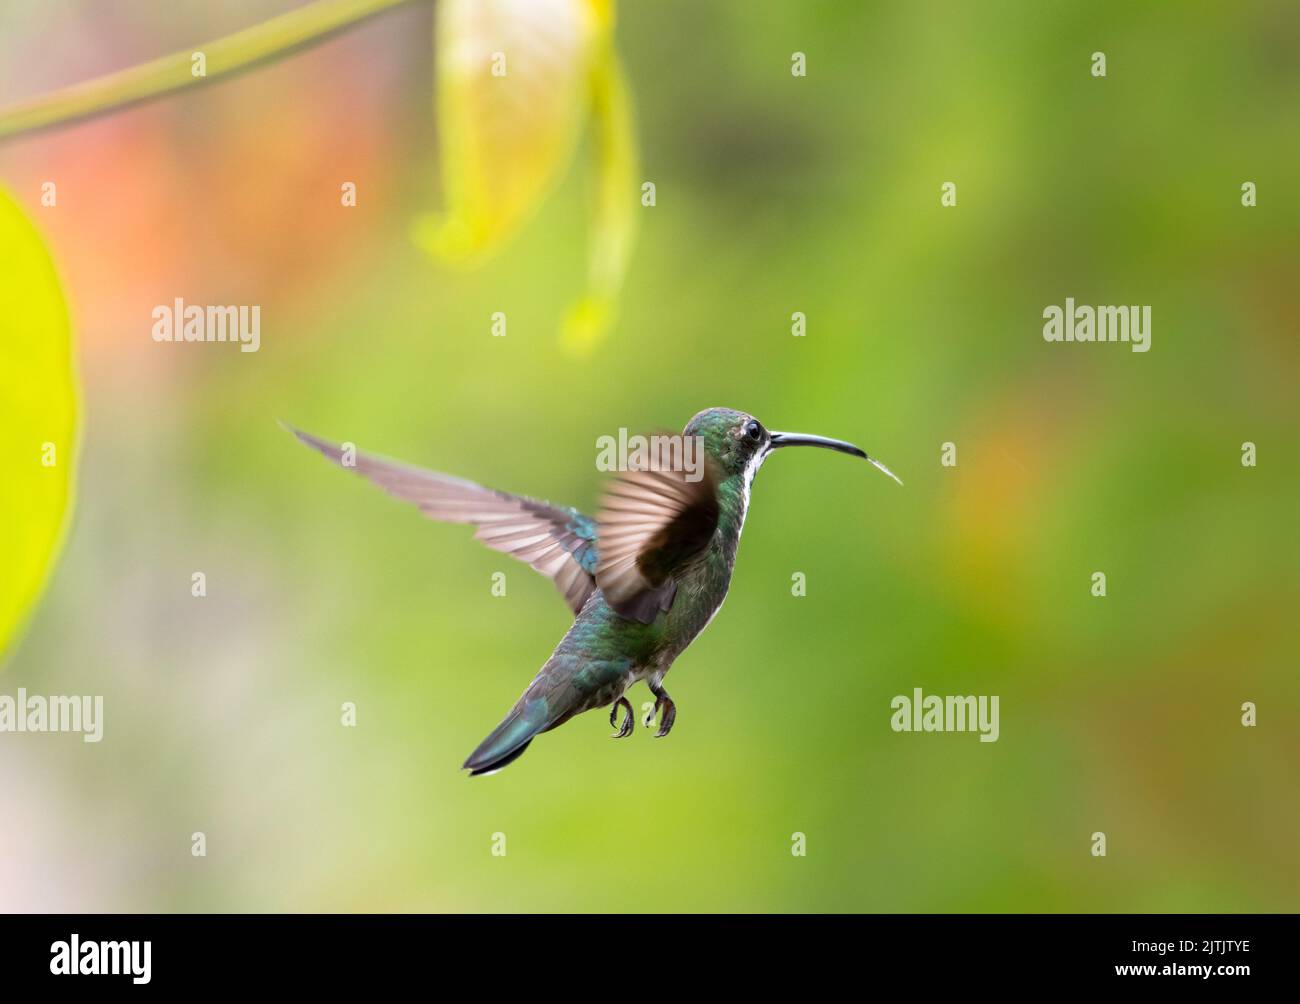 Black-throated Mango hummingbird flying away from the camera with her tongue out. Stock Photo